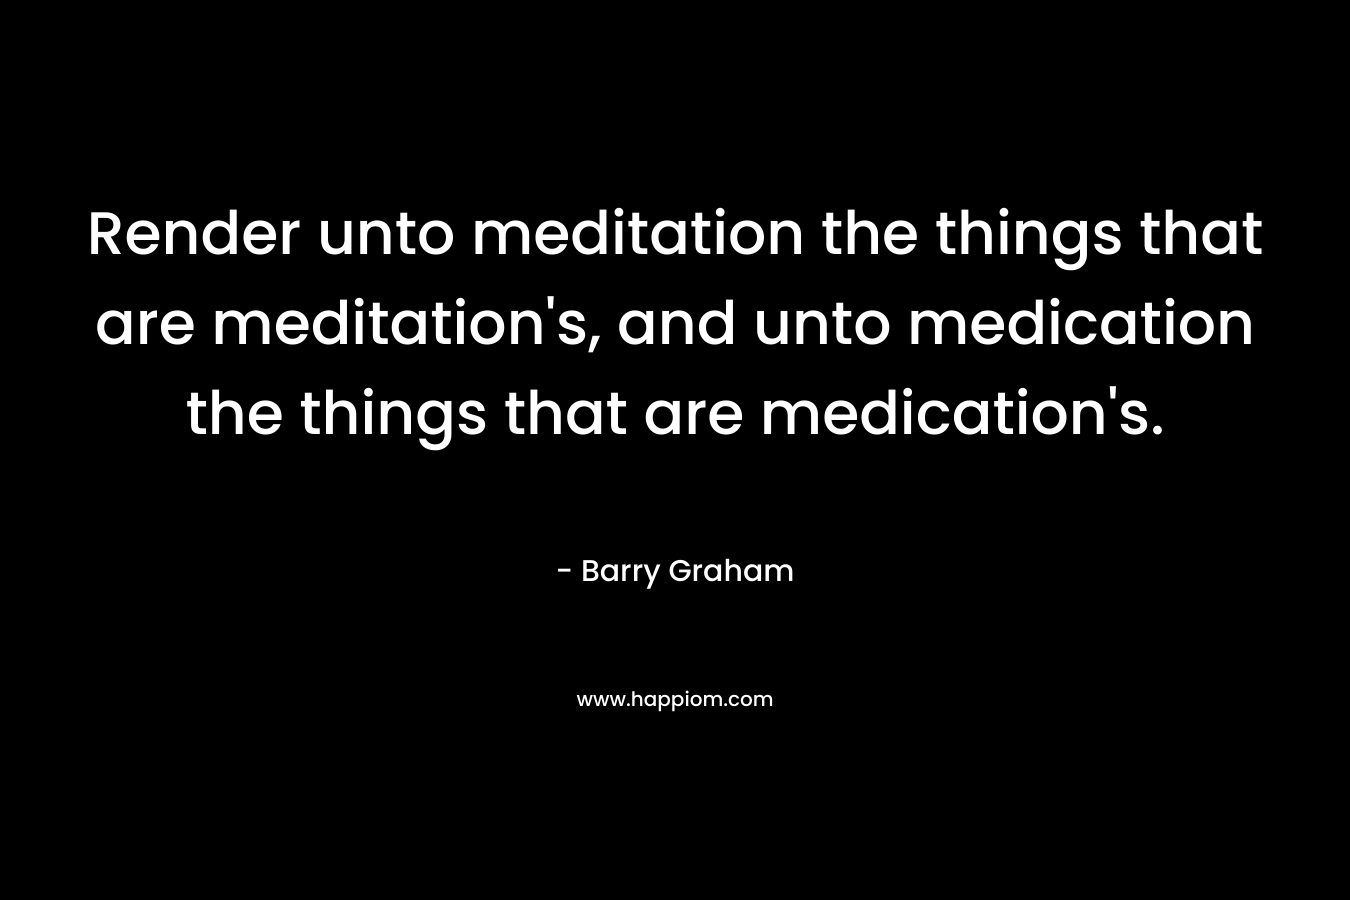 Render unto meditation the things that are meditation's, and unto medication the things that are medication's.